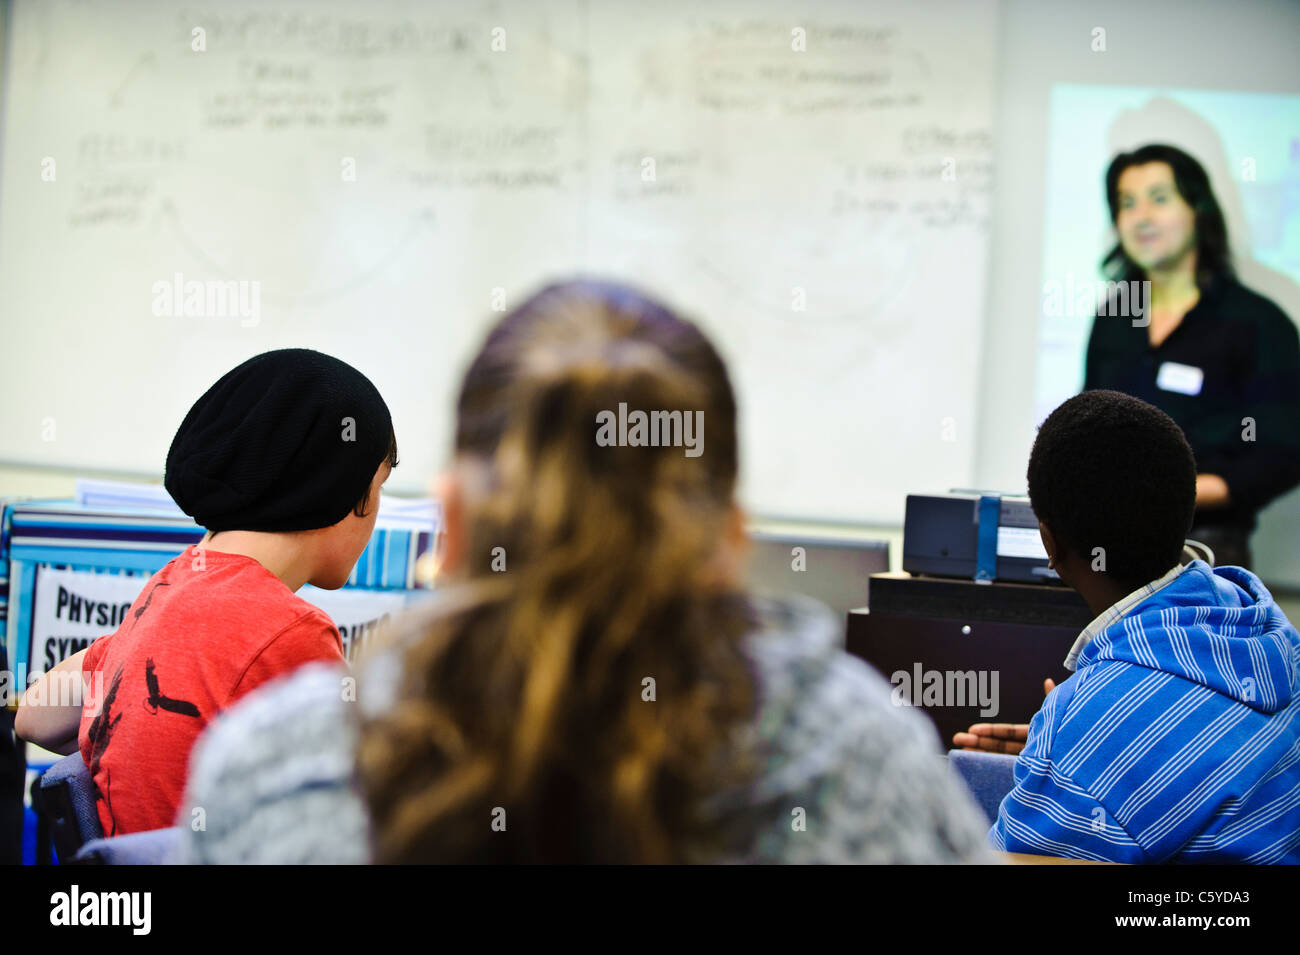 school children aged 12-13 years in classroom camera behind facing towards male teacher standing at the whiteboard Stock Photo